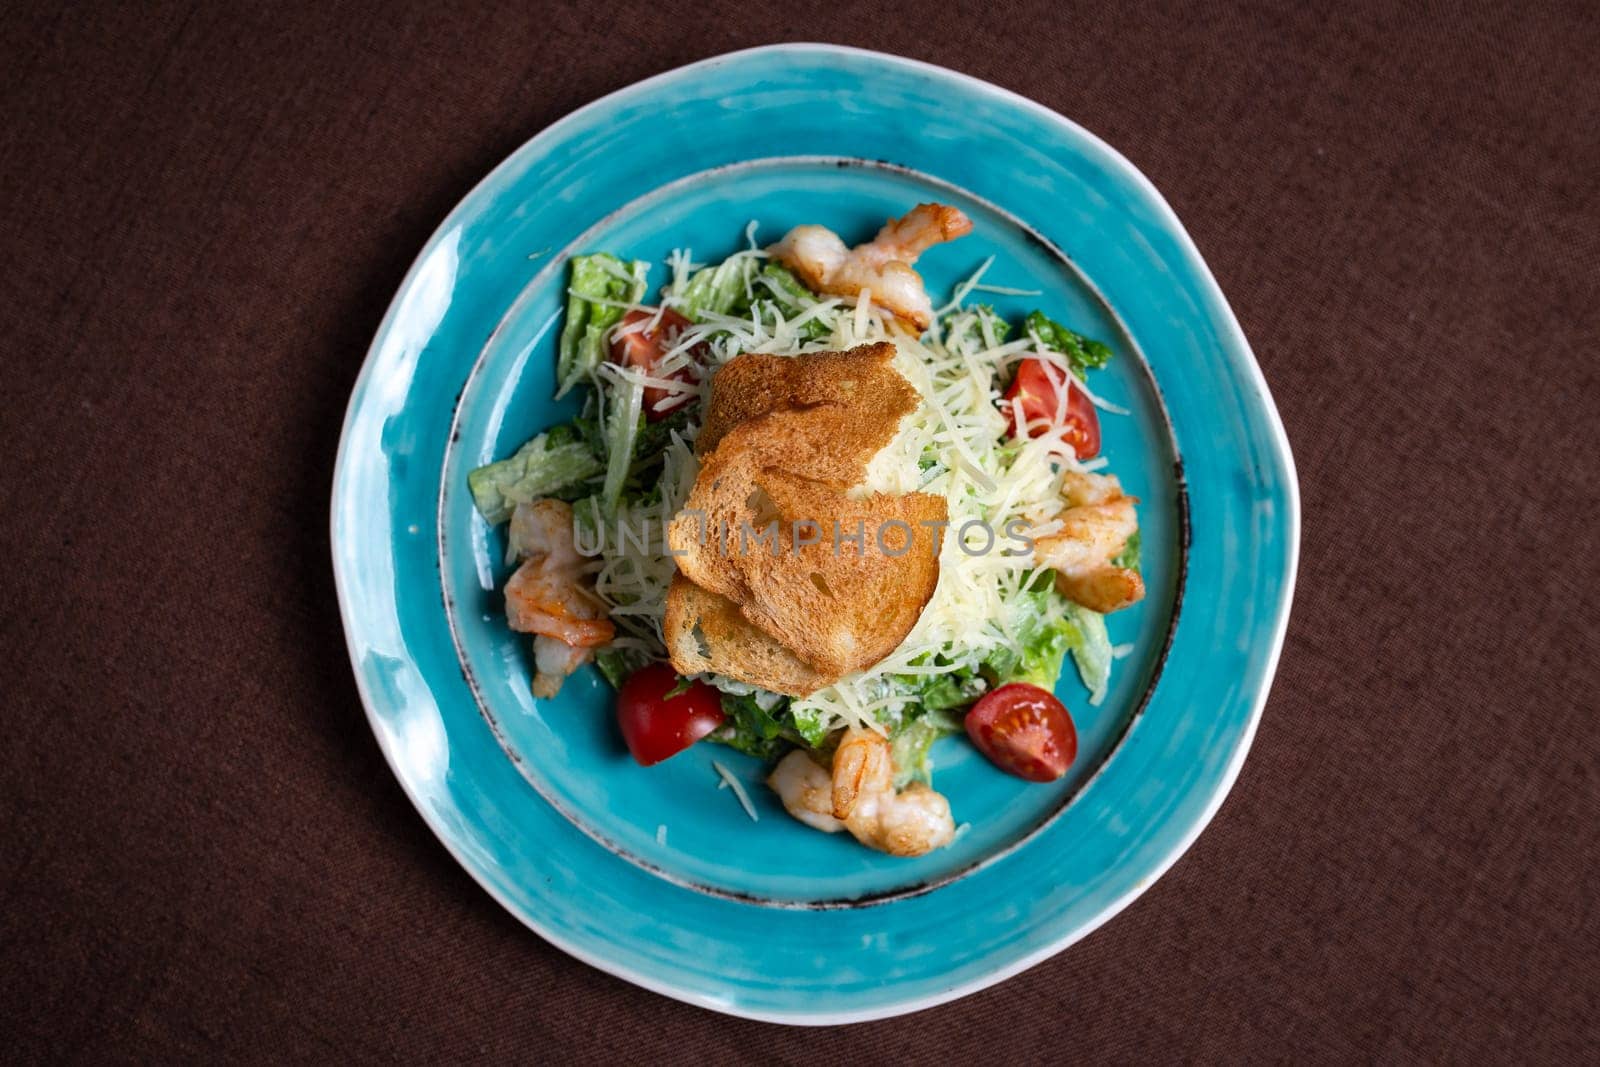 Healthy and delicious caesar salad with fresh greens, juicy tomatoes, and tasty shrimps on a blue plate. Isolated on a brown background.